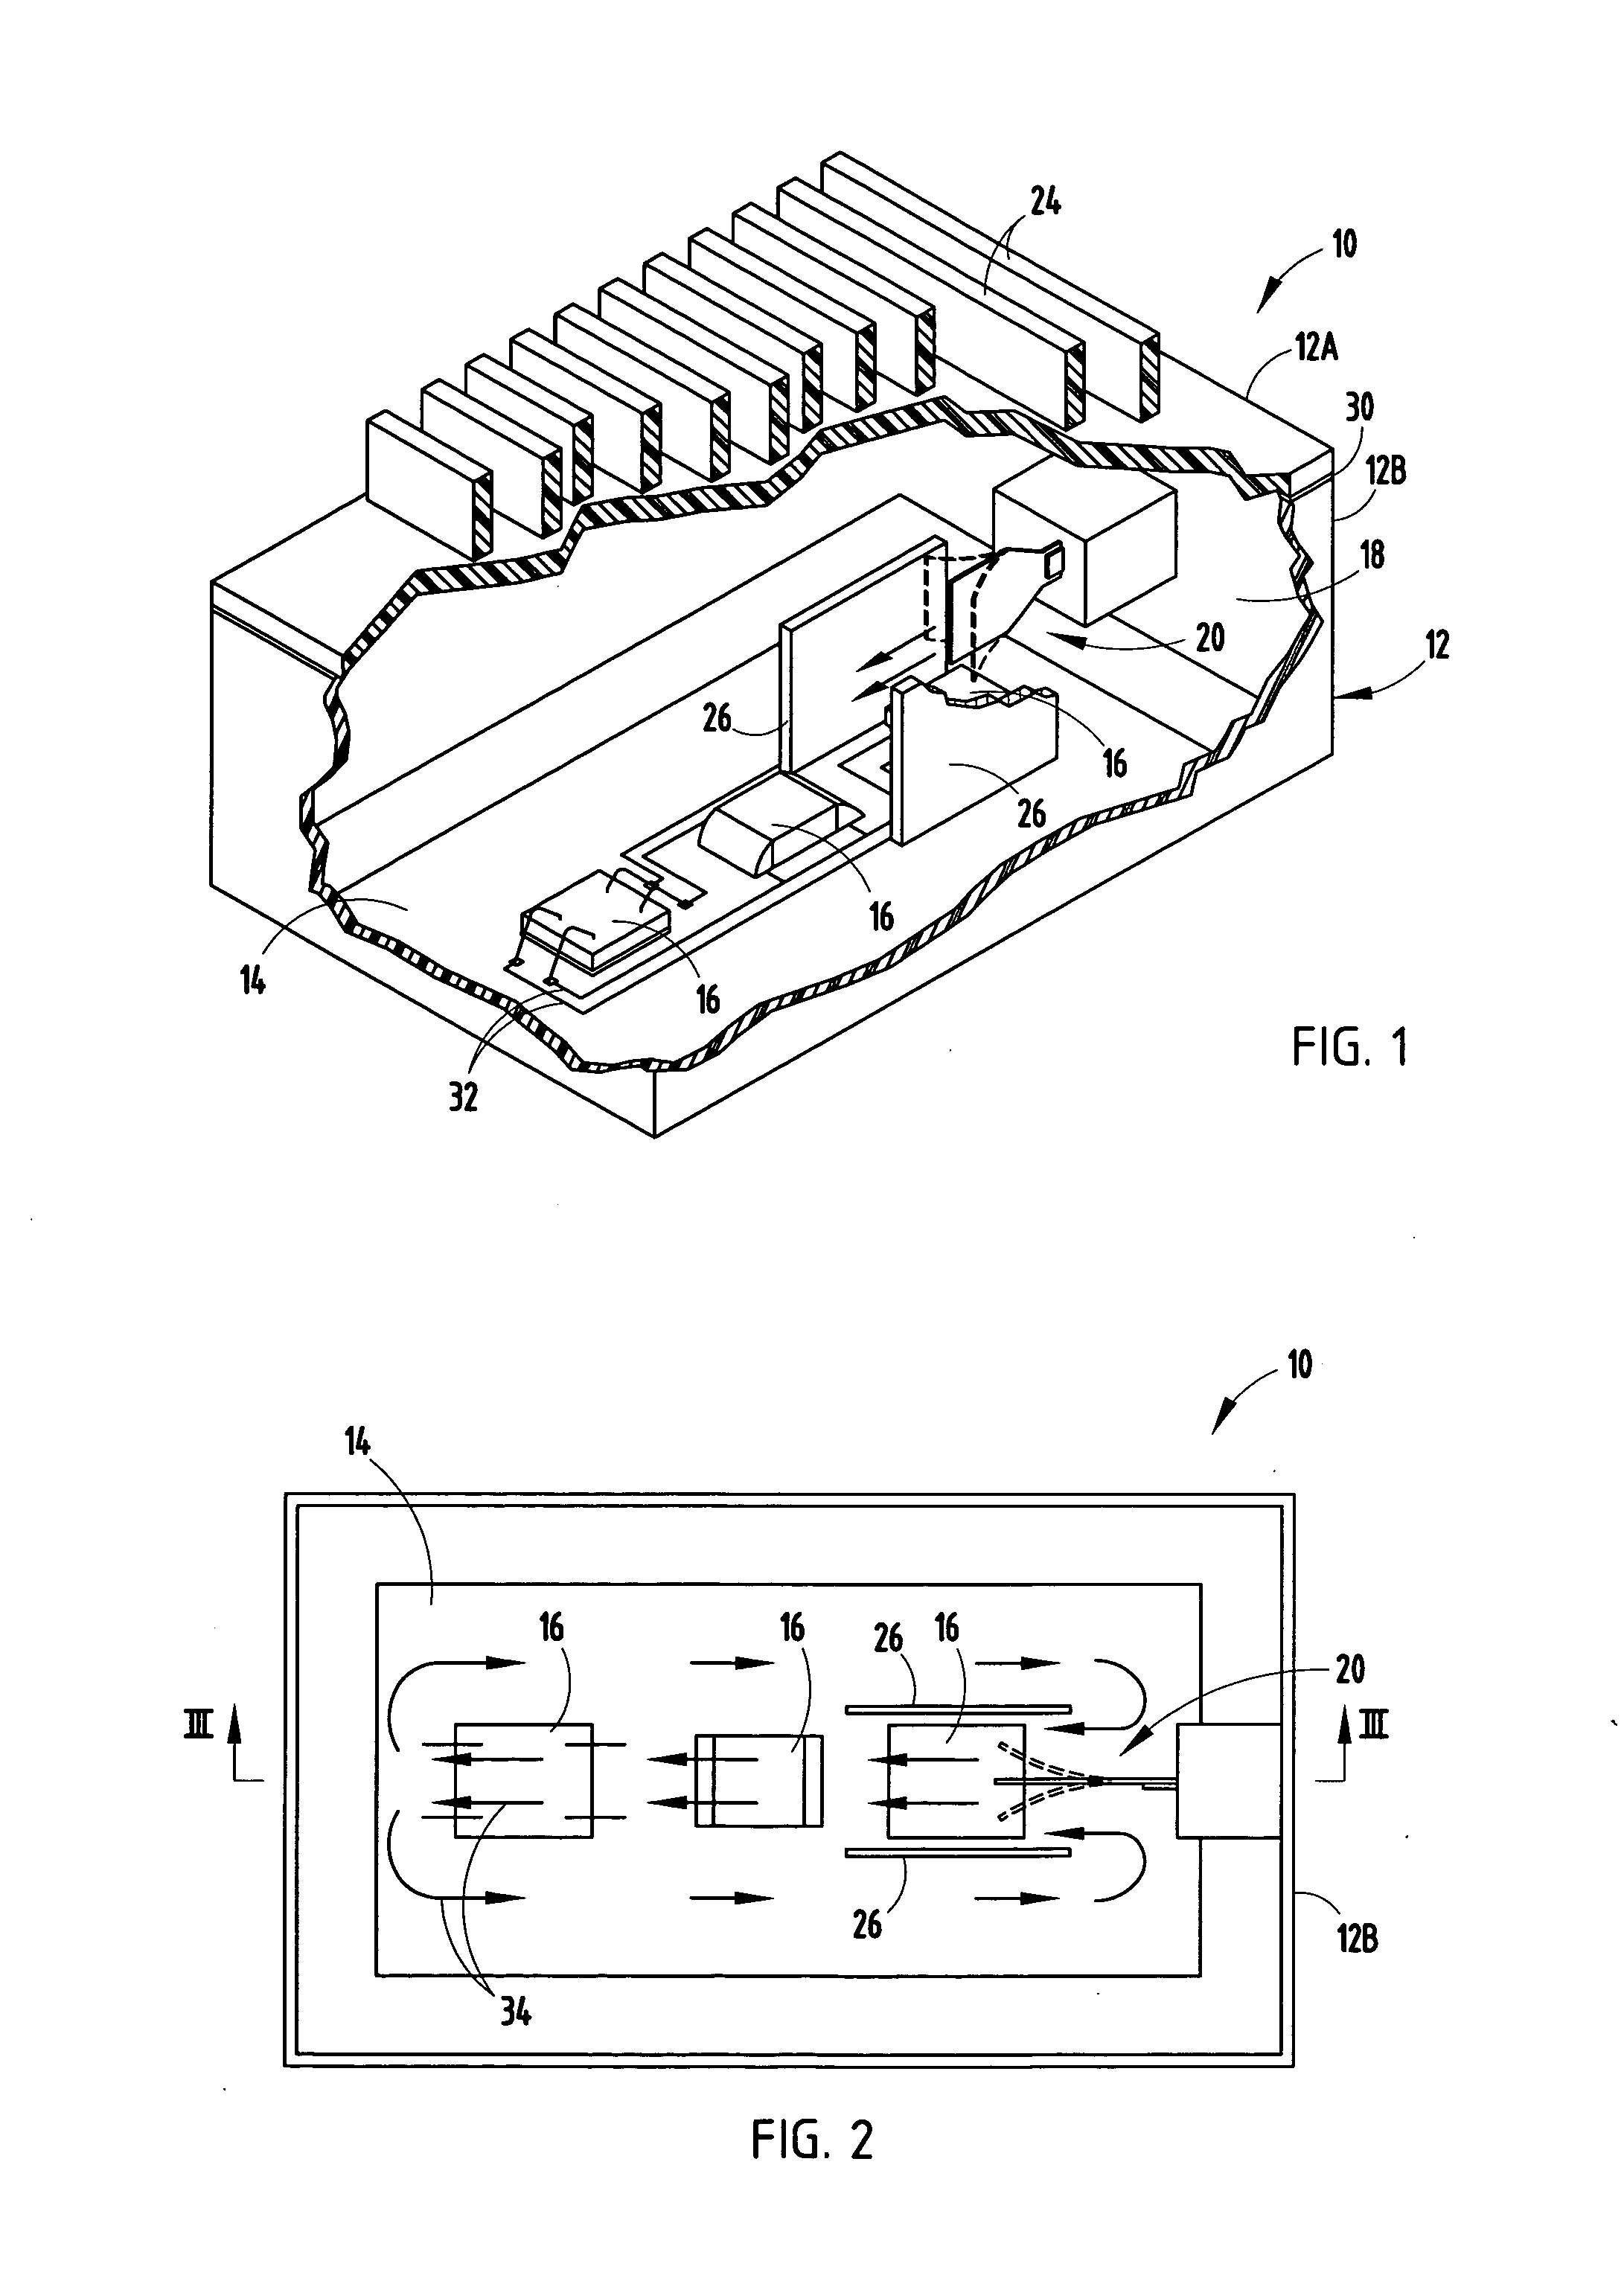 Electronic package and method of cooling electronics